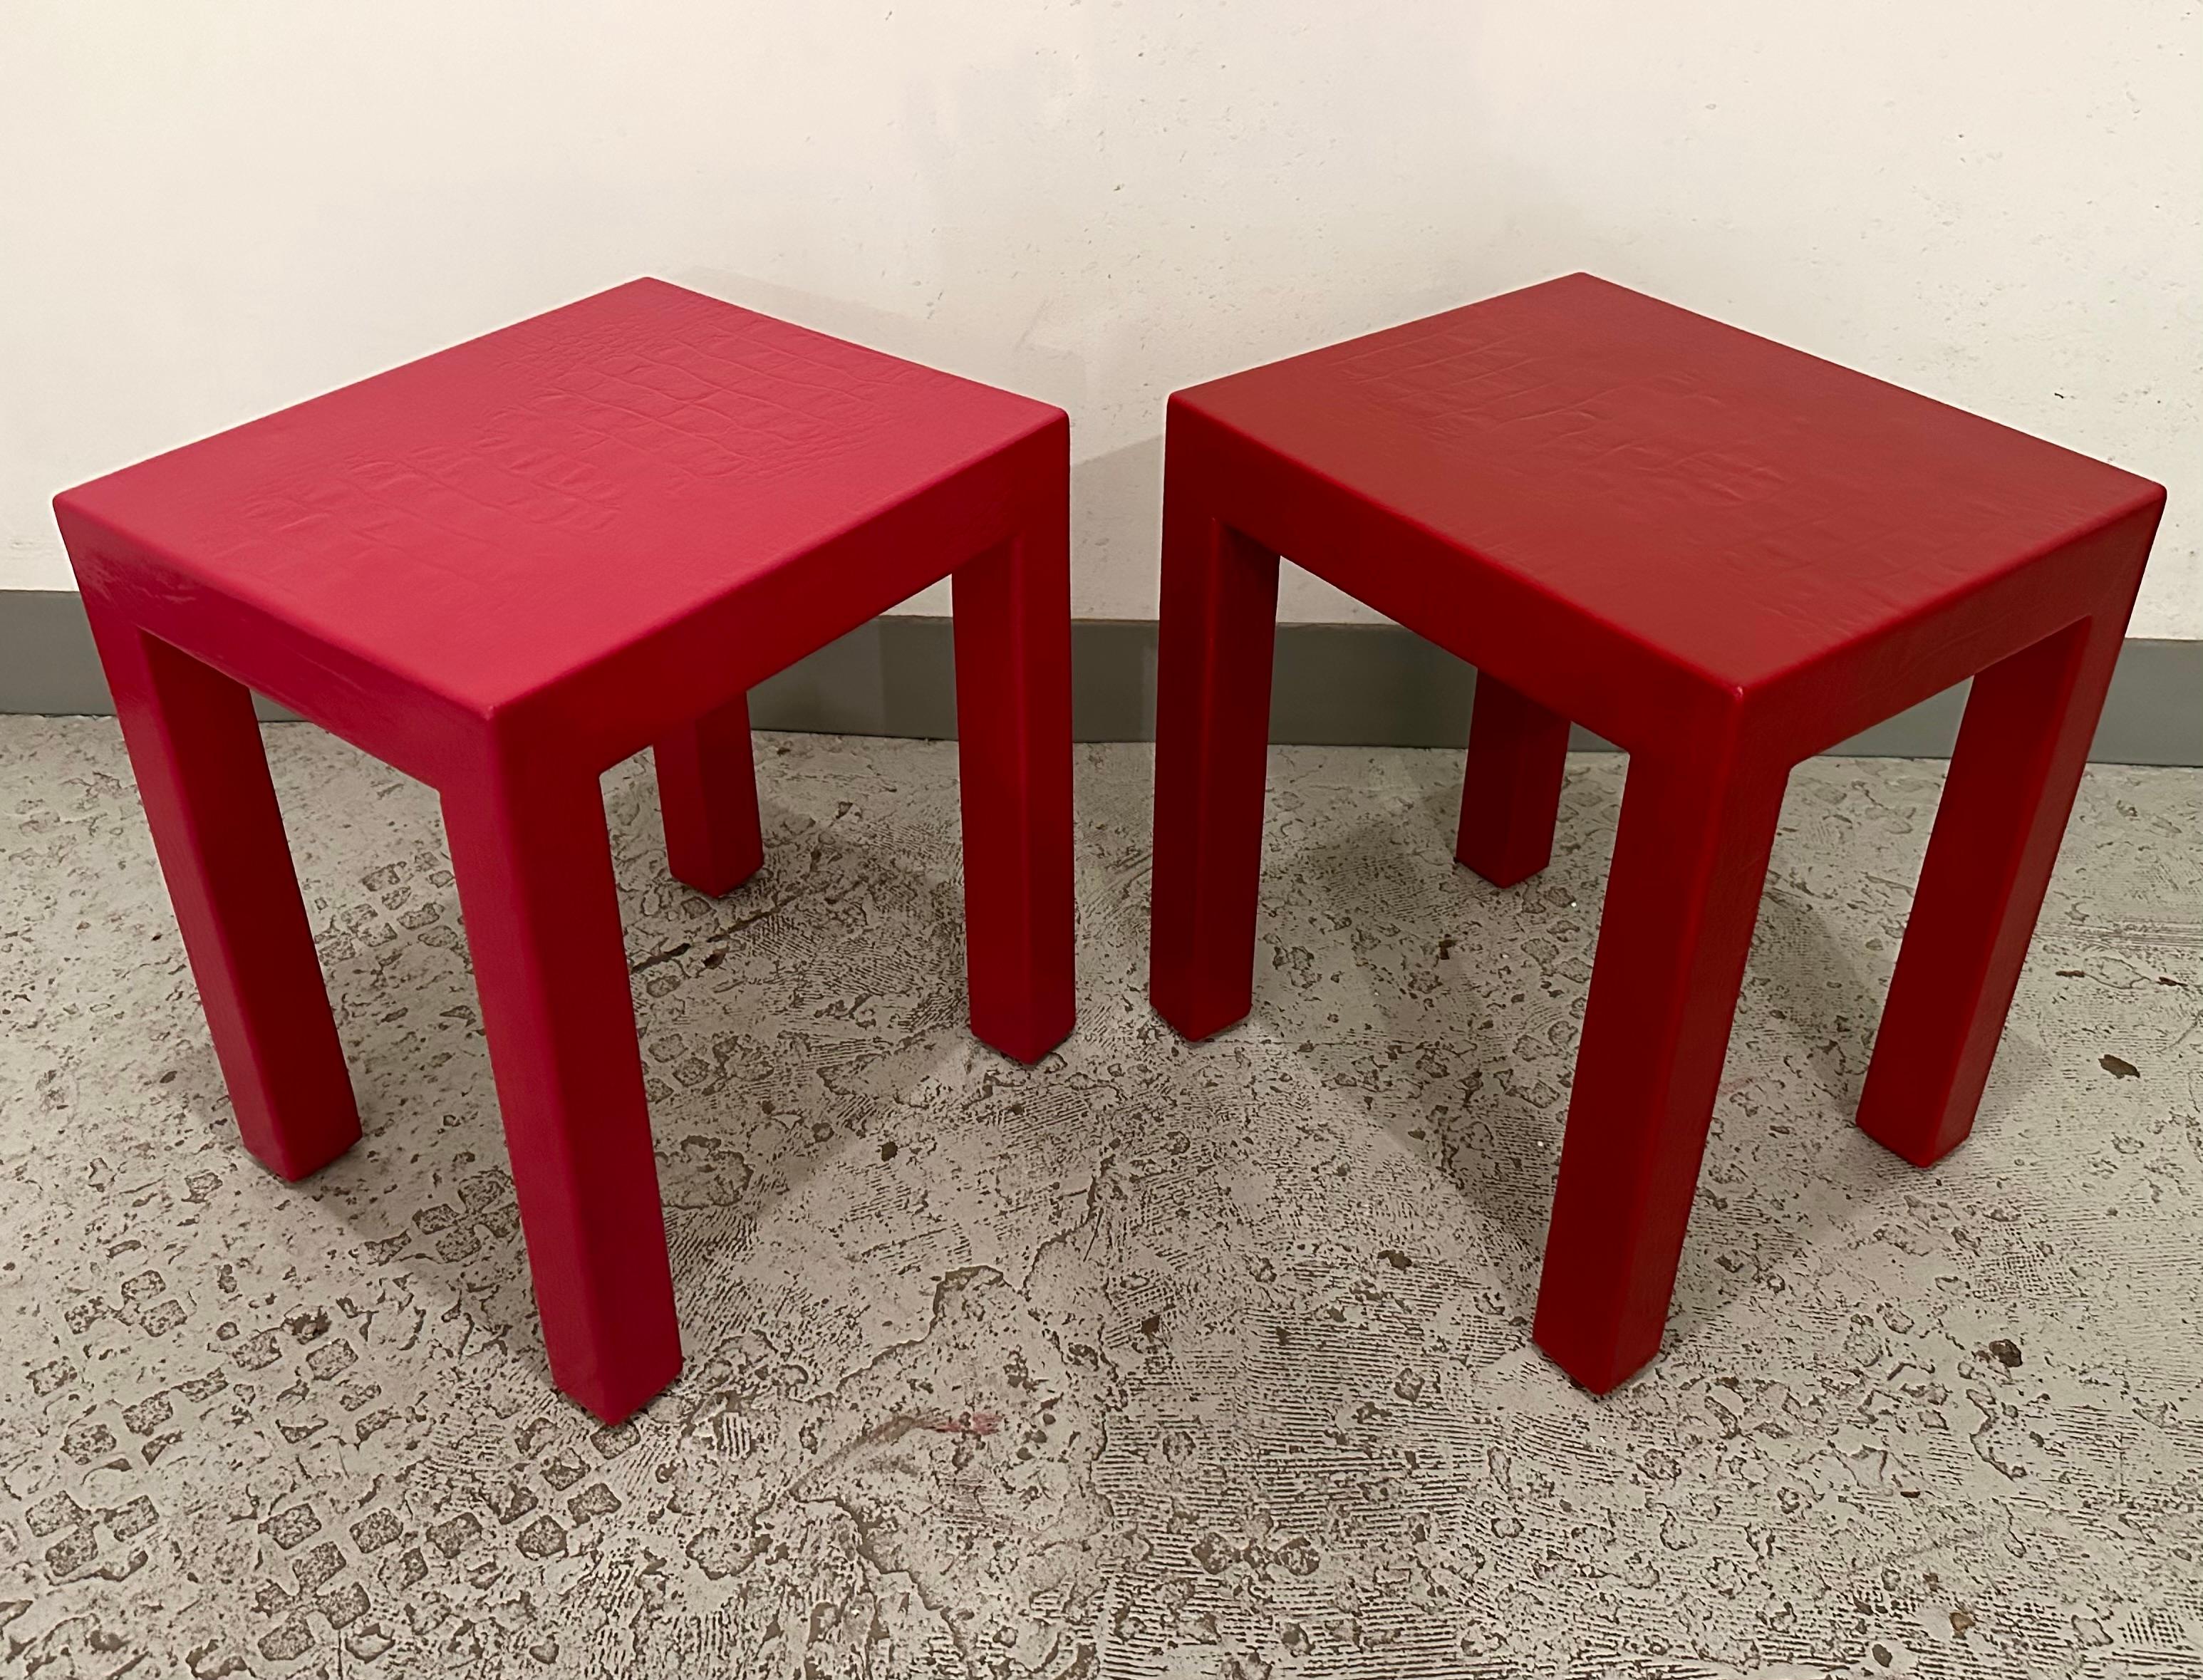 Uncommon early pair of Karl Springer's iconic crocodile printed leather Parsons side or occasional tables. Identical in size, one is clad in a fun hot fuchsia while the other is a more sombre burgundy. 

Part of a group of furnishing we acquired